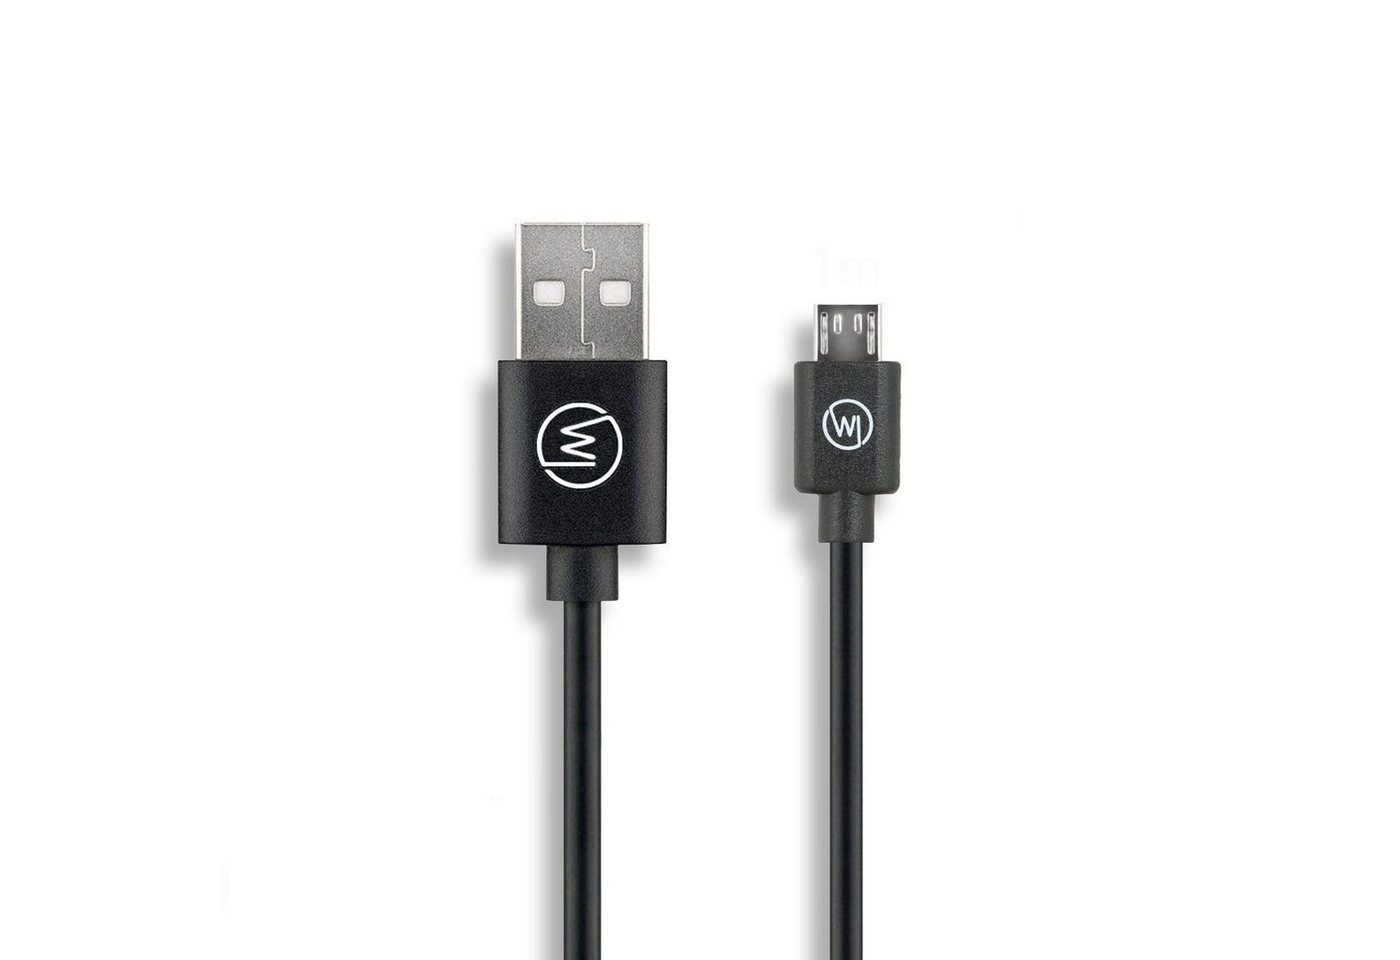 Wicked Chili MicroUSB Kabel für Amazon Kindle, Fire, Paperwhite Gaming-Controllerkabel, MicroUSB, USB-A (100 cm), Extra Lang, mit Knickschutz, Play & Charge Gaming-Controllerkabel, Uni von Wicked Chili